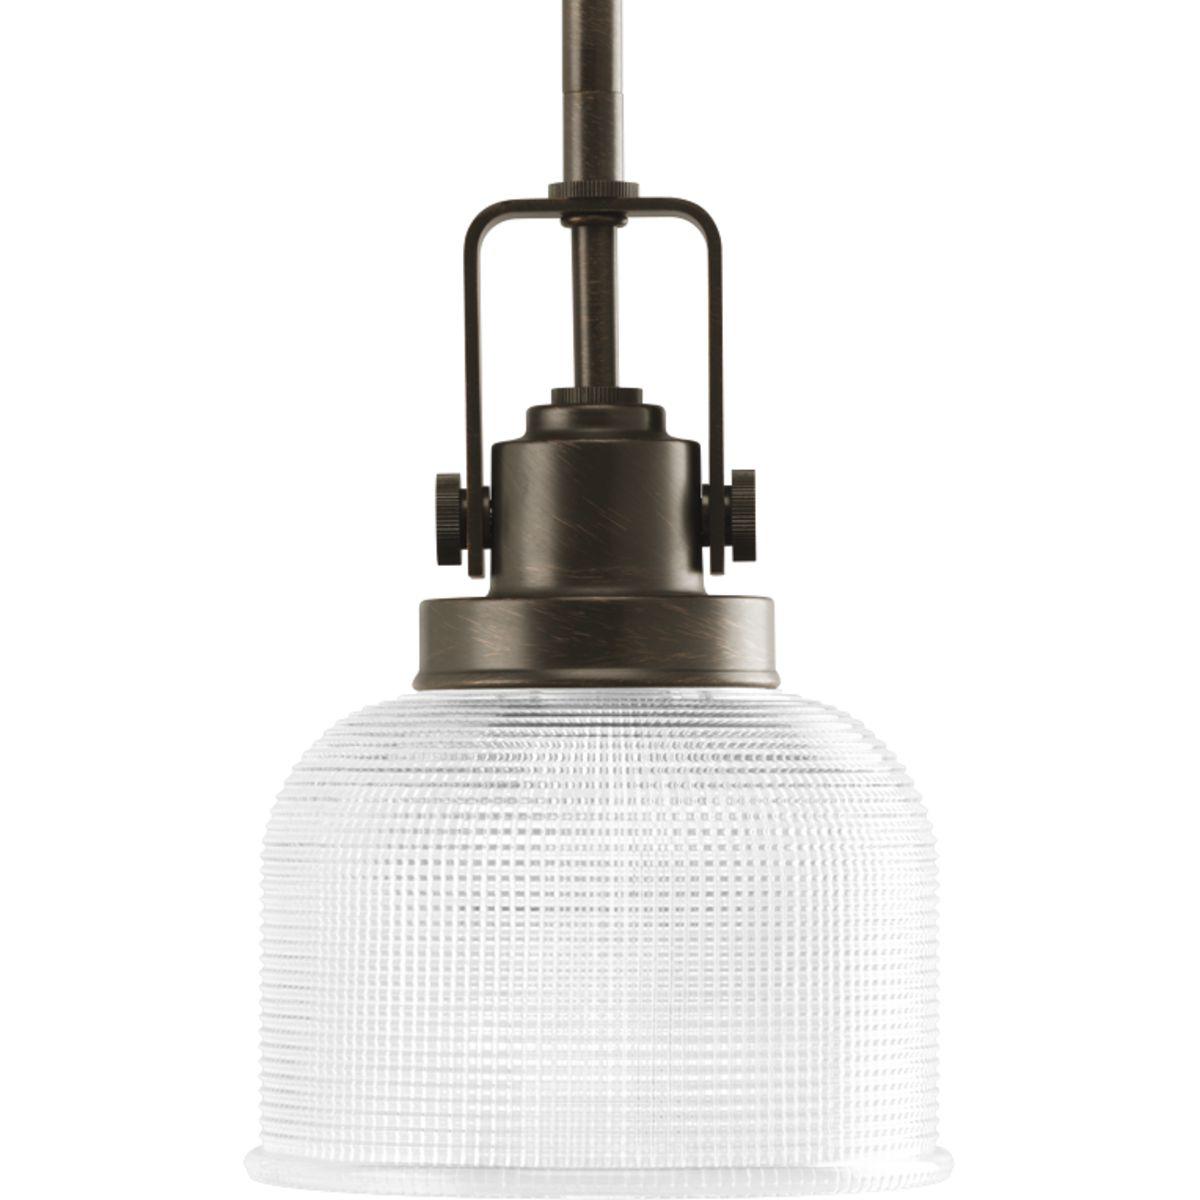 Hubbell P5173-74 The Archie Collection brings a vintage, industrial flair to interior settings. The collection’s distinctive double prismatic glass adds visual interest as its crisscross pattern comes to life when illuminated. The distinctive finely crafted strap and knob